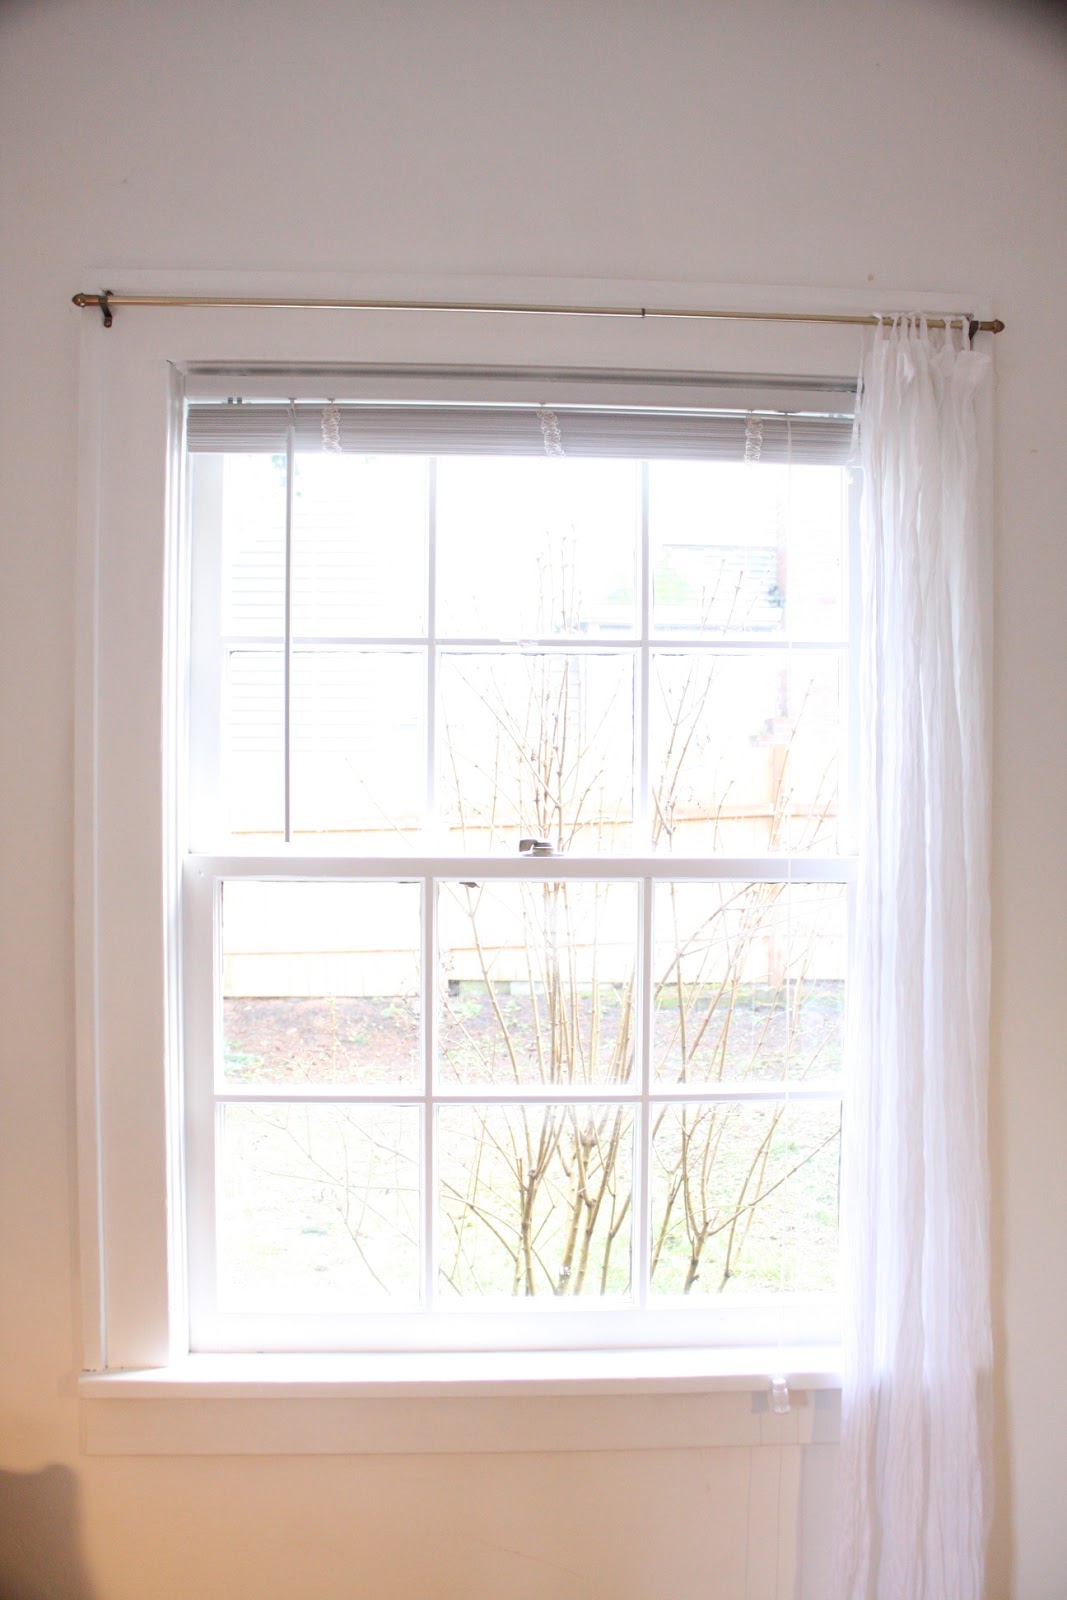 Homing Missile: How to Repair a Broken Sash Cord in a Double-Hung ...